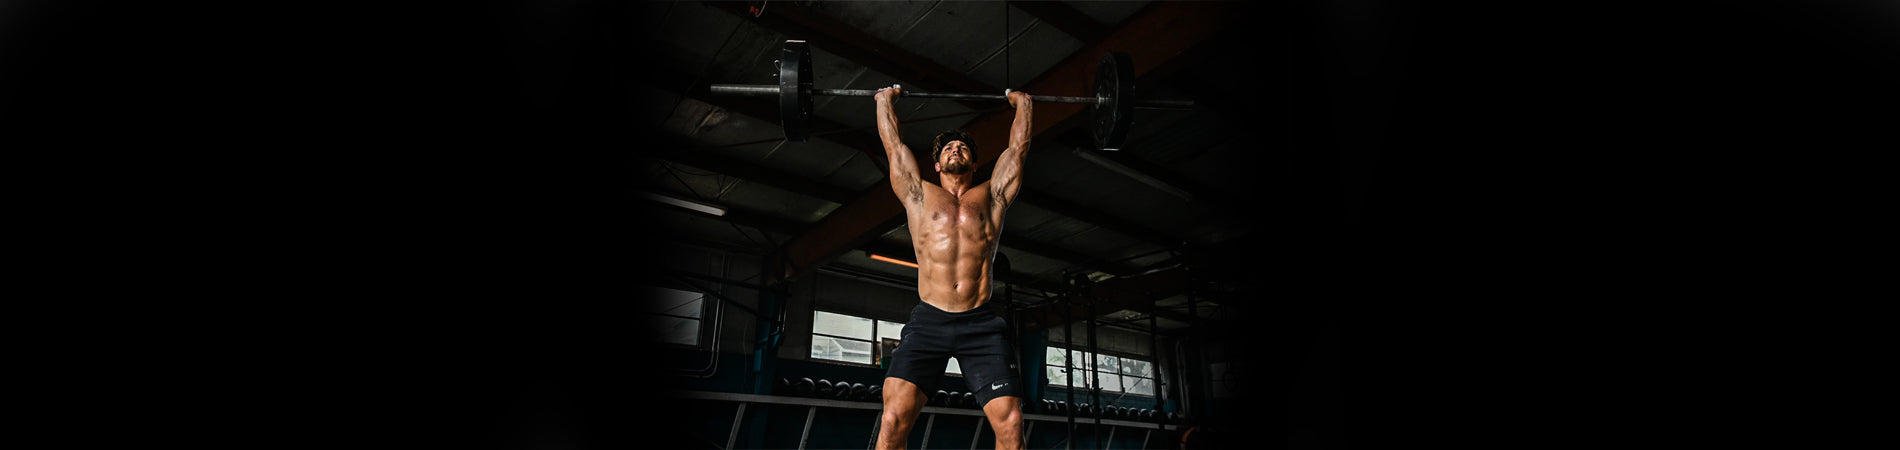 13 Facts Every Athlete Should Know About Working Out